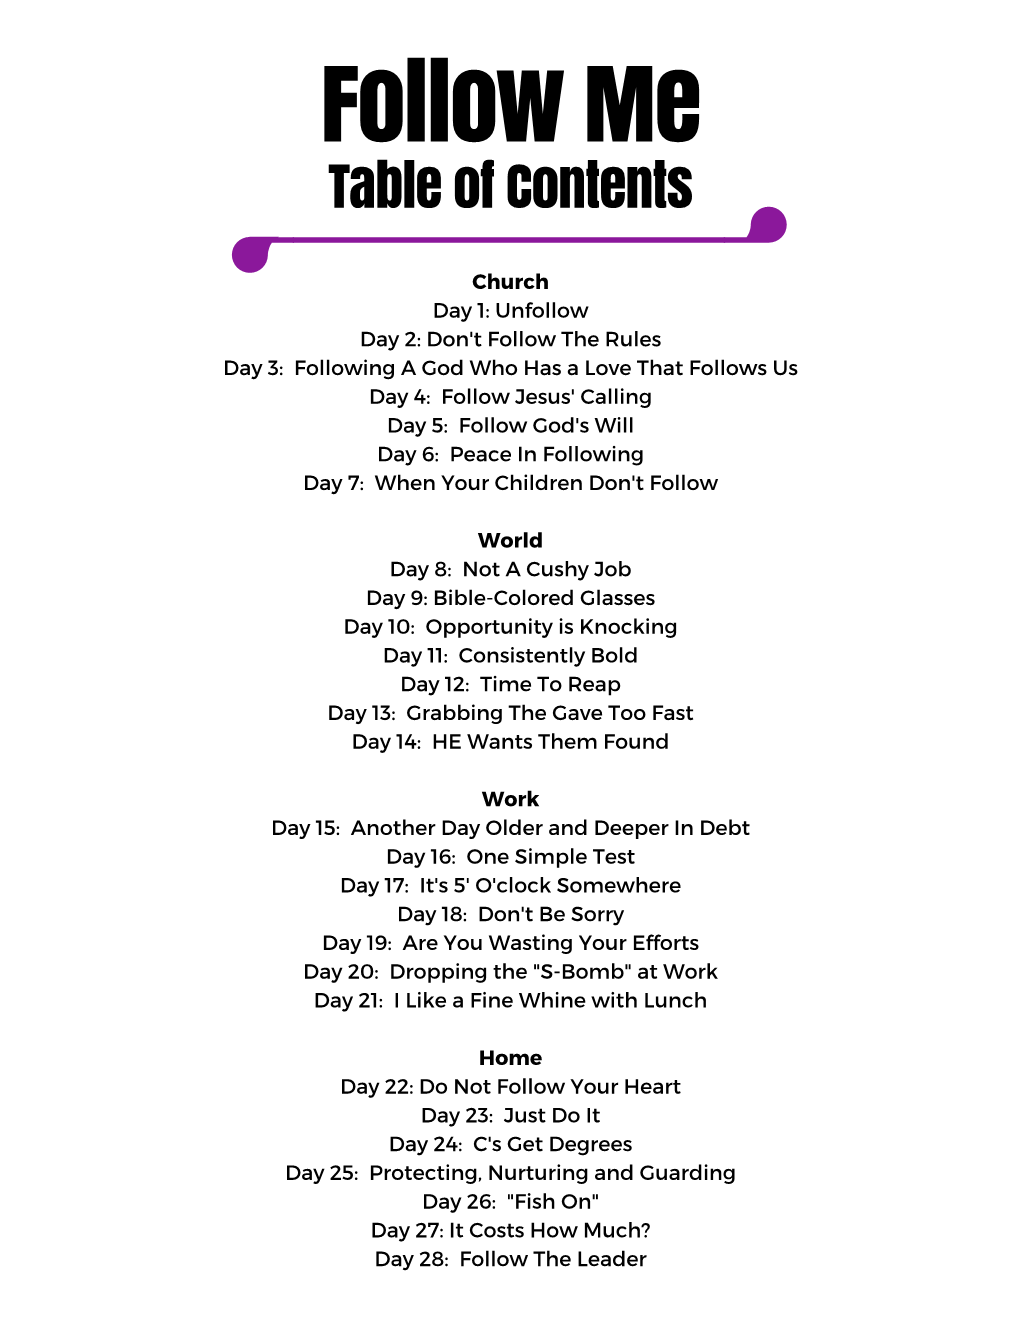 Follow Me Table of Contents